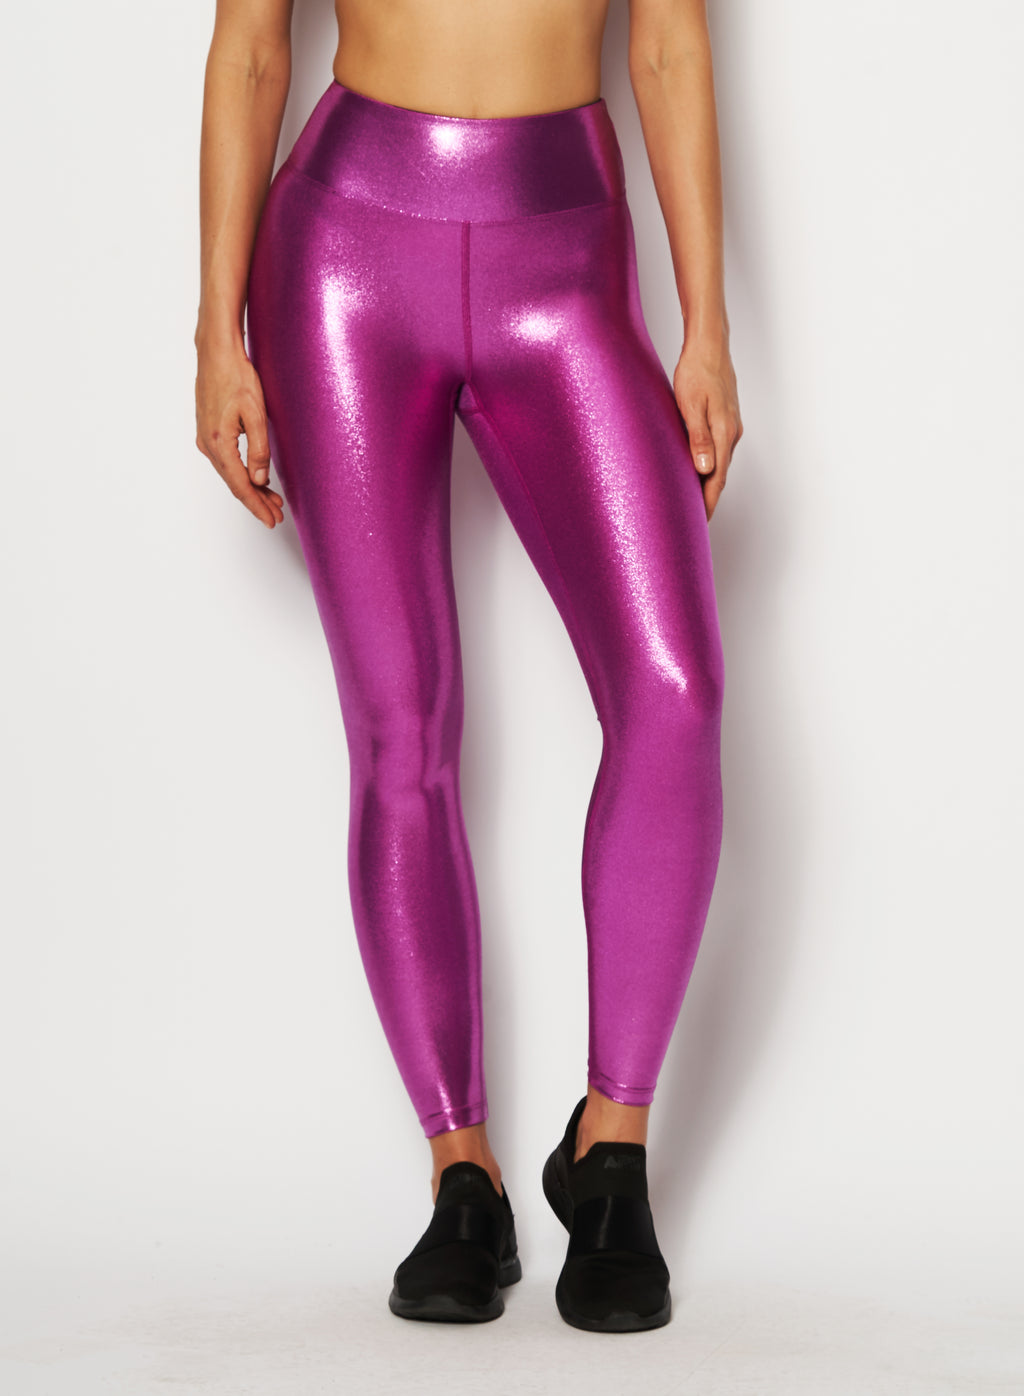 Heroine Sport Marvel Metallic High-Waisted Legging  Urban Outfitters Japan  - Clothing, Music, Home & Accessories